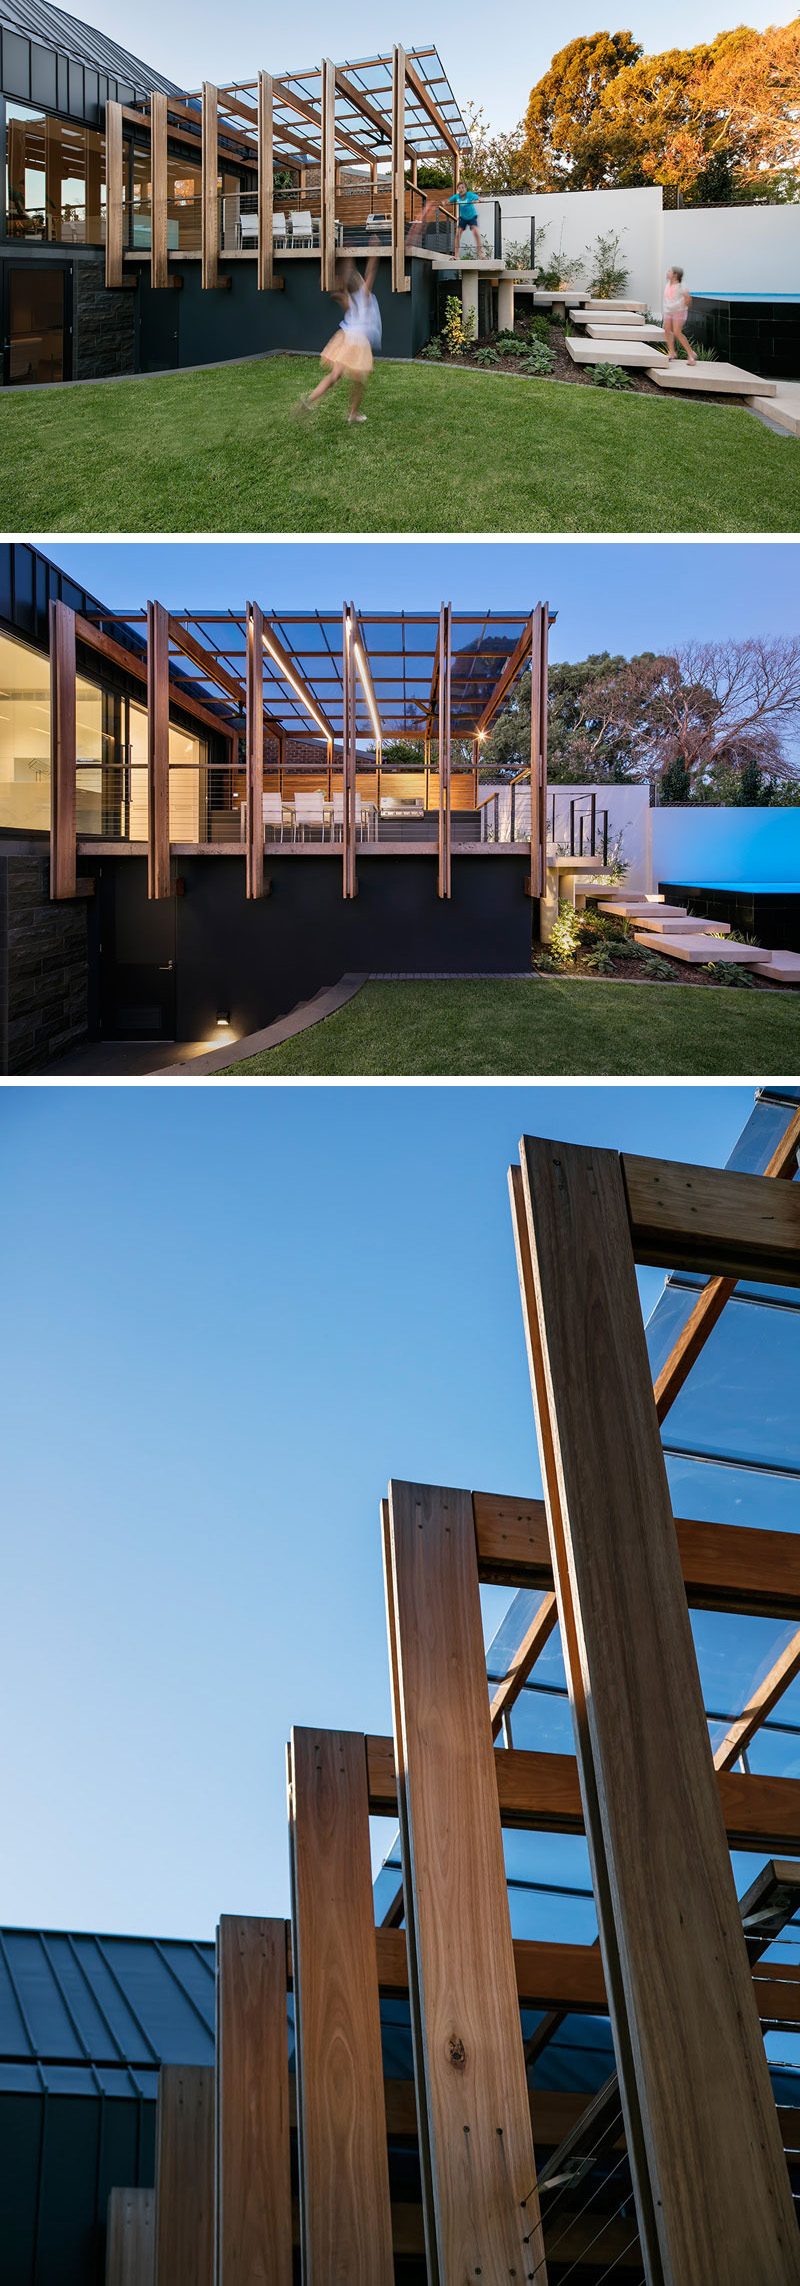 This house has an outdoor entertaining area with a modern pergola and deck, offering both light and shelter. The glass roof sitting on top of the wood fins protects furniture and people from getting wet when it rains, and the wood fins includes LED strips built into them to create a soft light for the outdoor space.